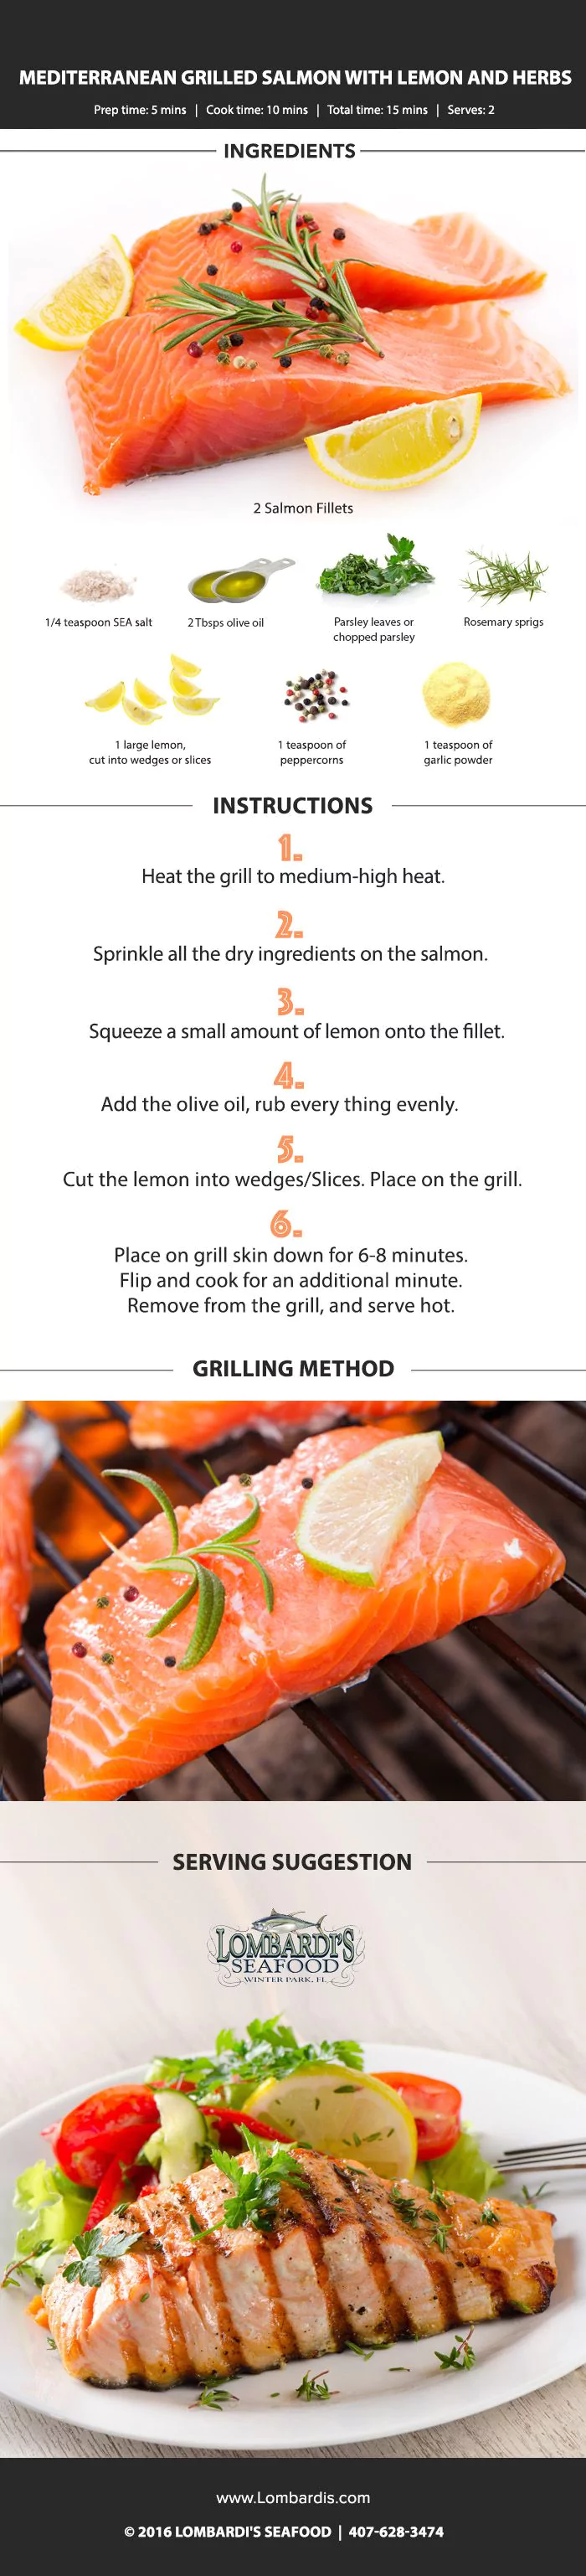 Mediterranean Grilled Salmon With Lemon and Herbs